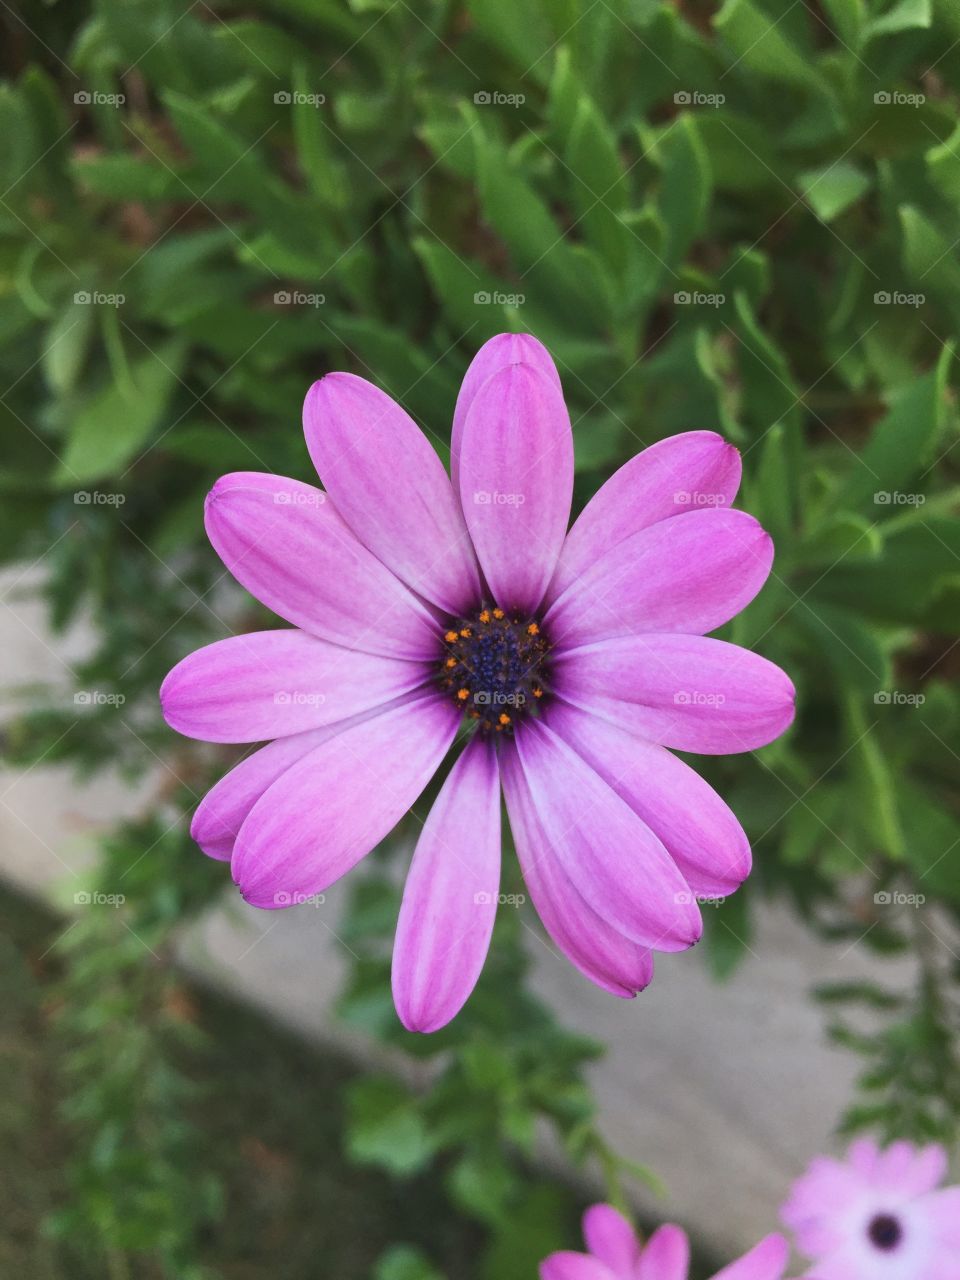 Elevated view of purple beautiful flower